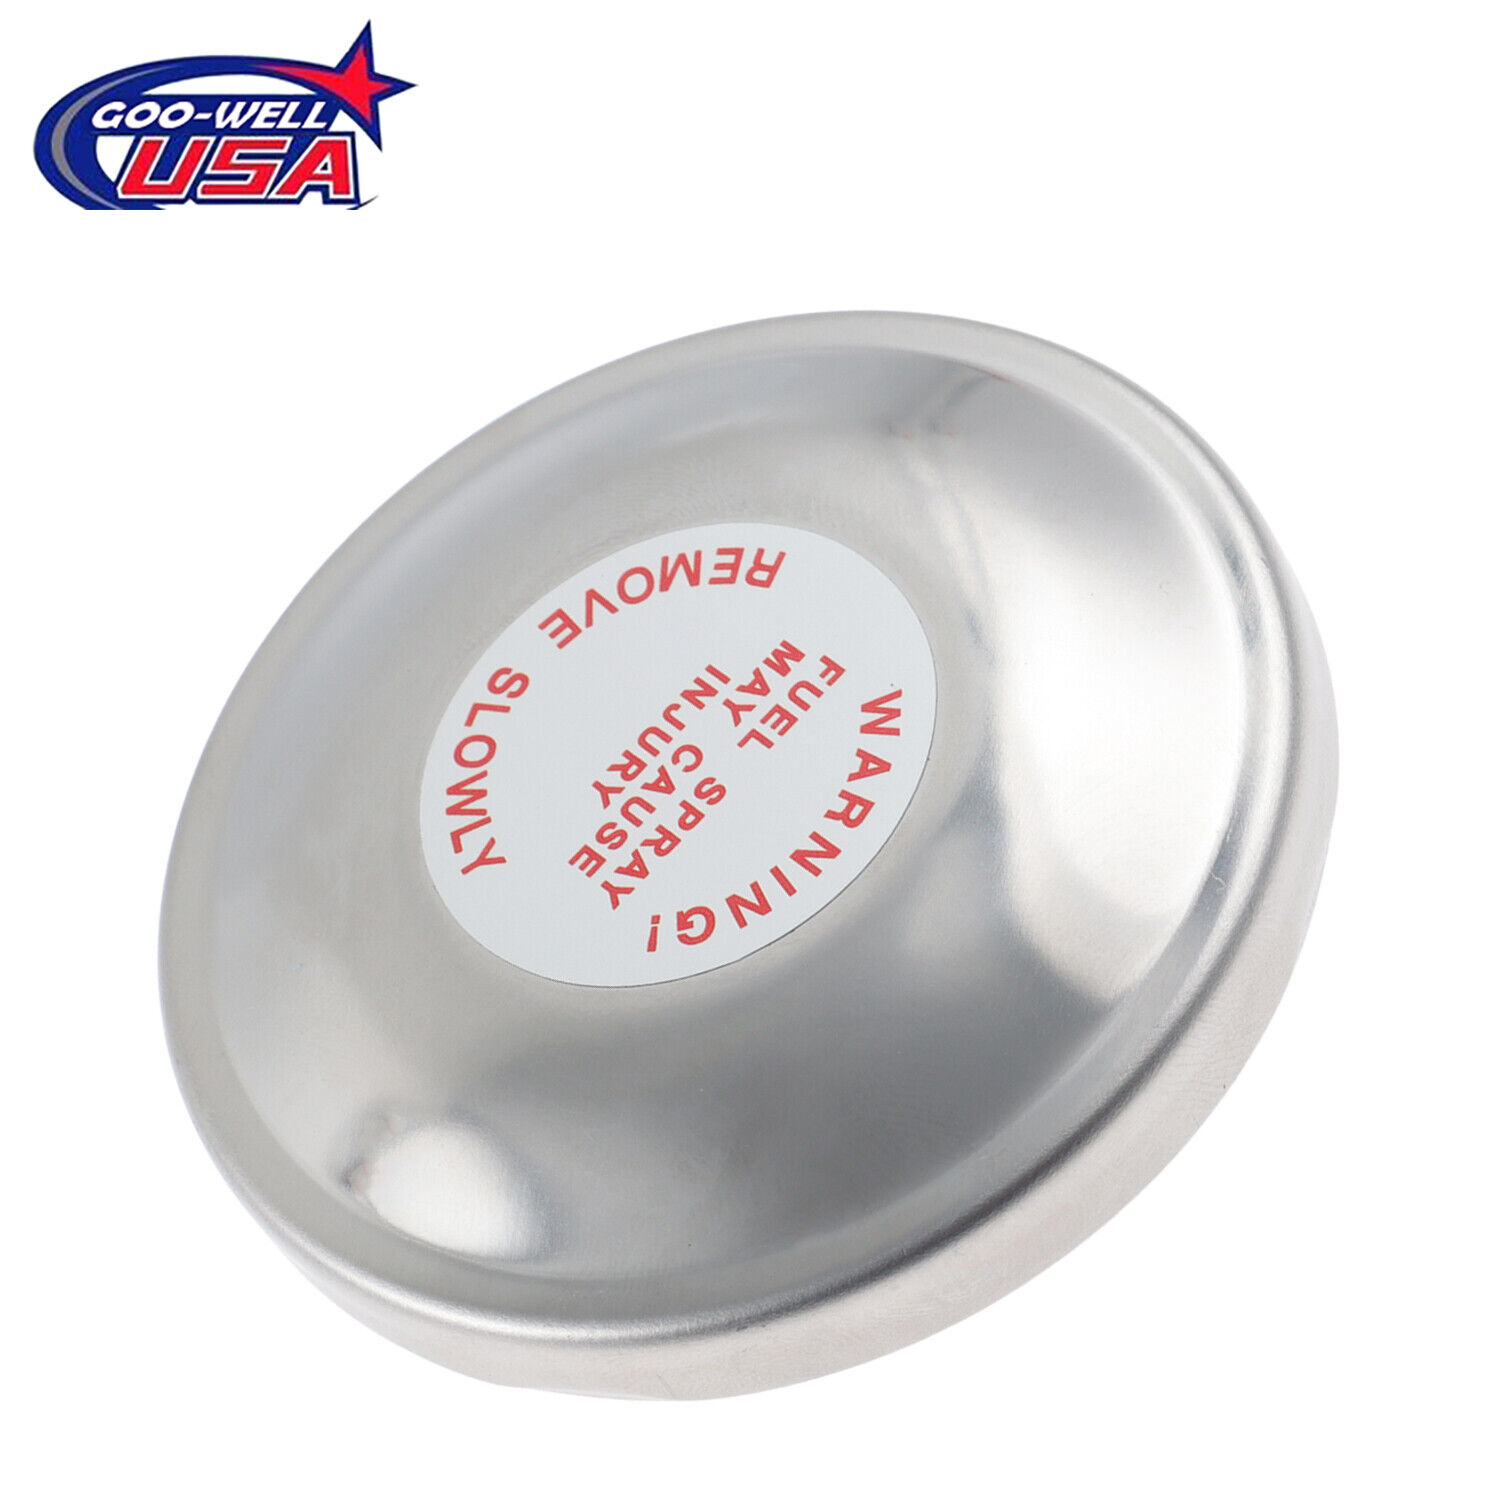 New Gas Cap Fit for Ford Tractor 2N 8N 9N Jubilee 600 700 800 900 7810